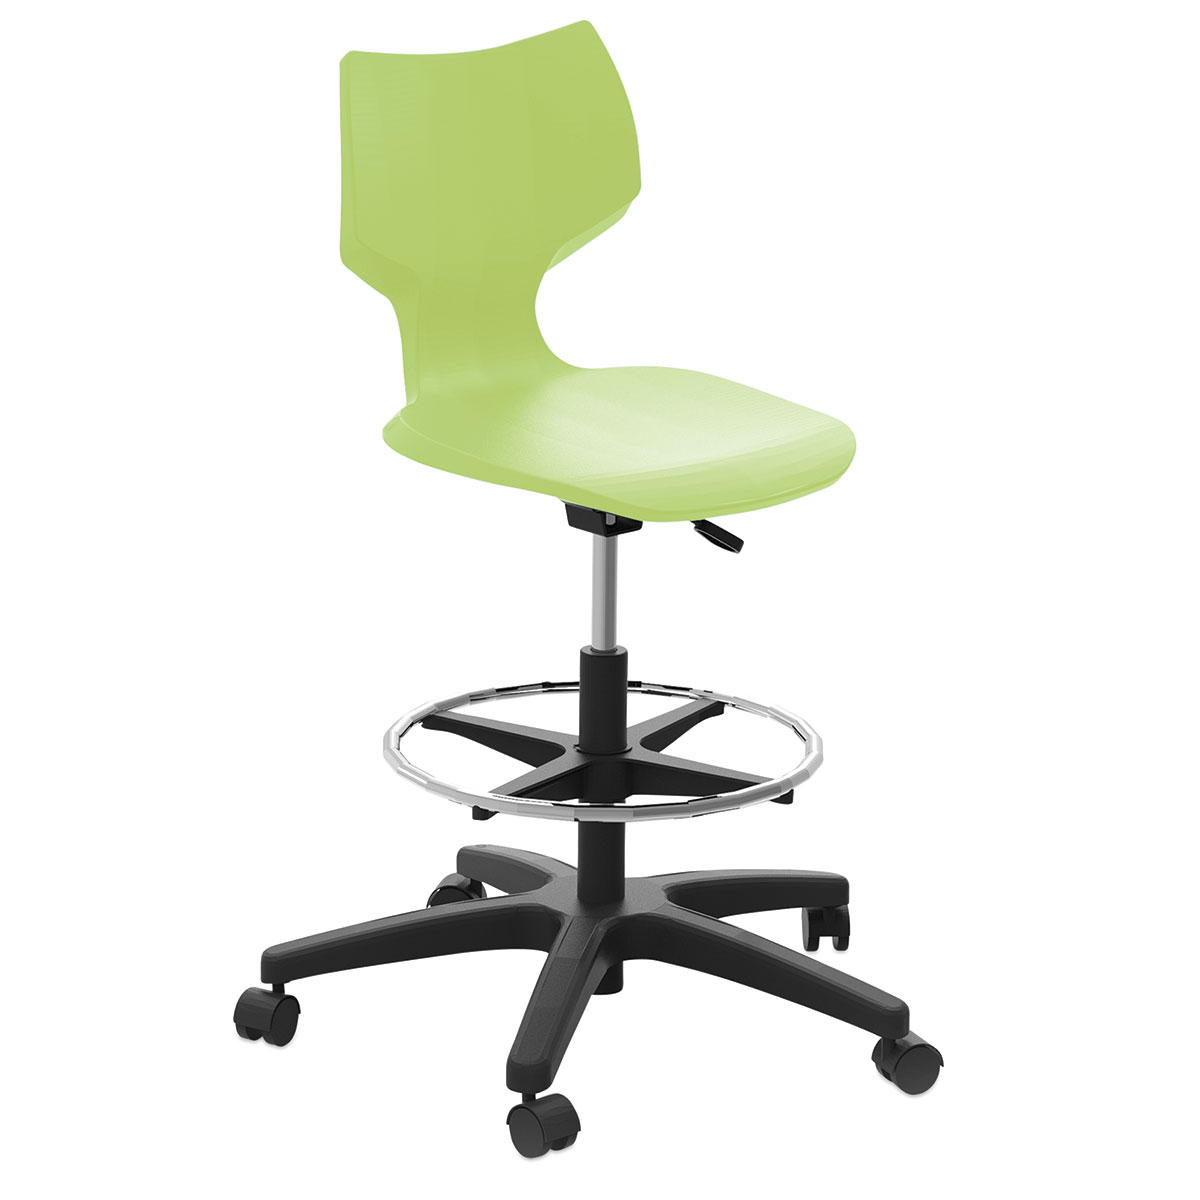 Smith System Flavors Adjustable Stool - Apple (Lime Green), with Casters